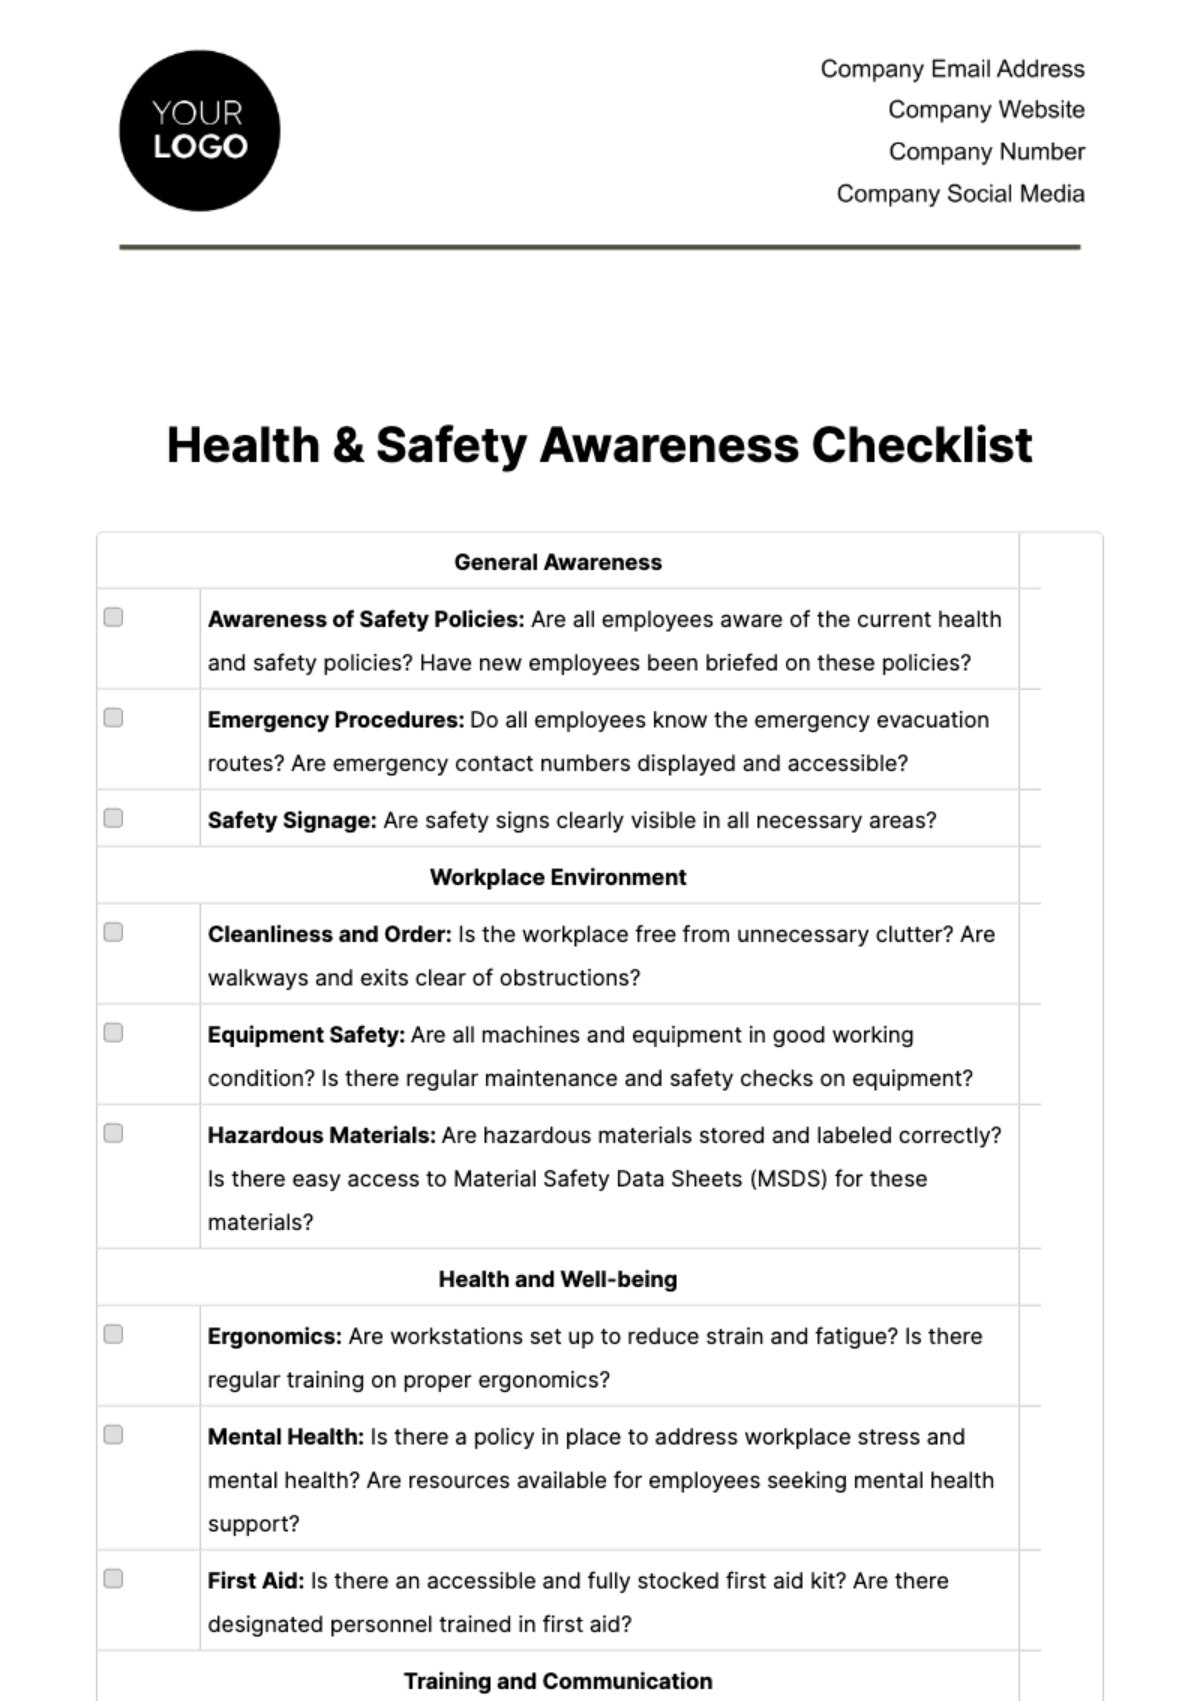 Free Health & Safety Awareness Checklist Template